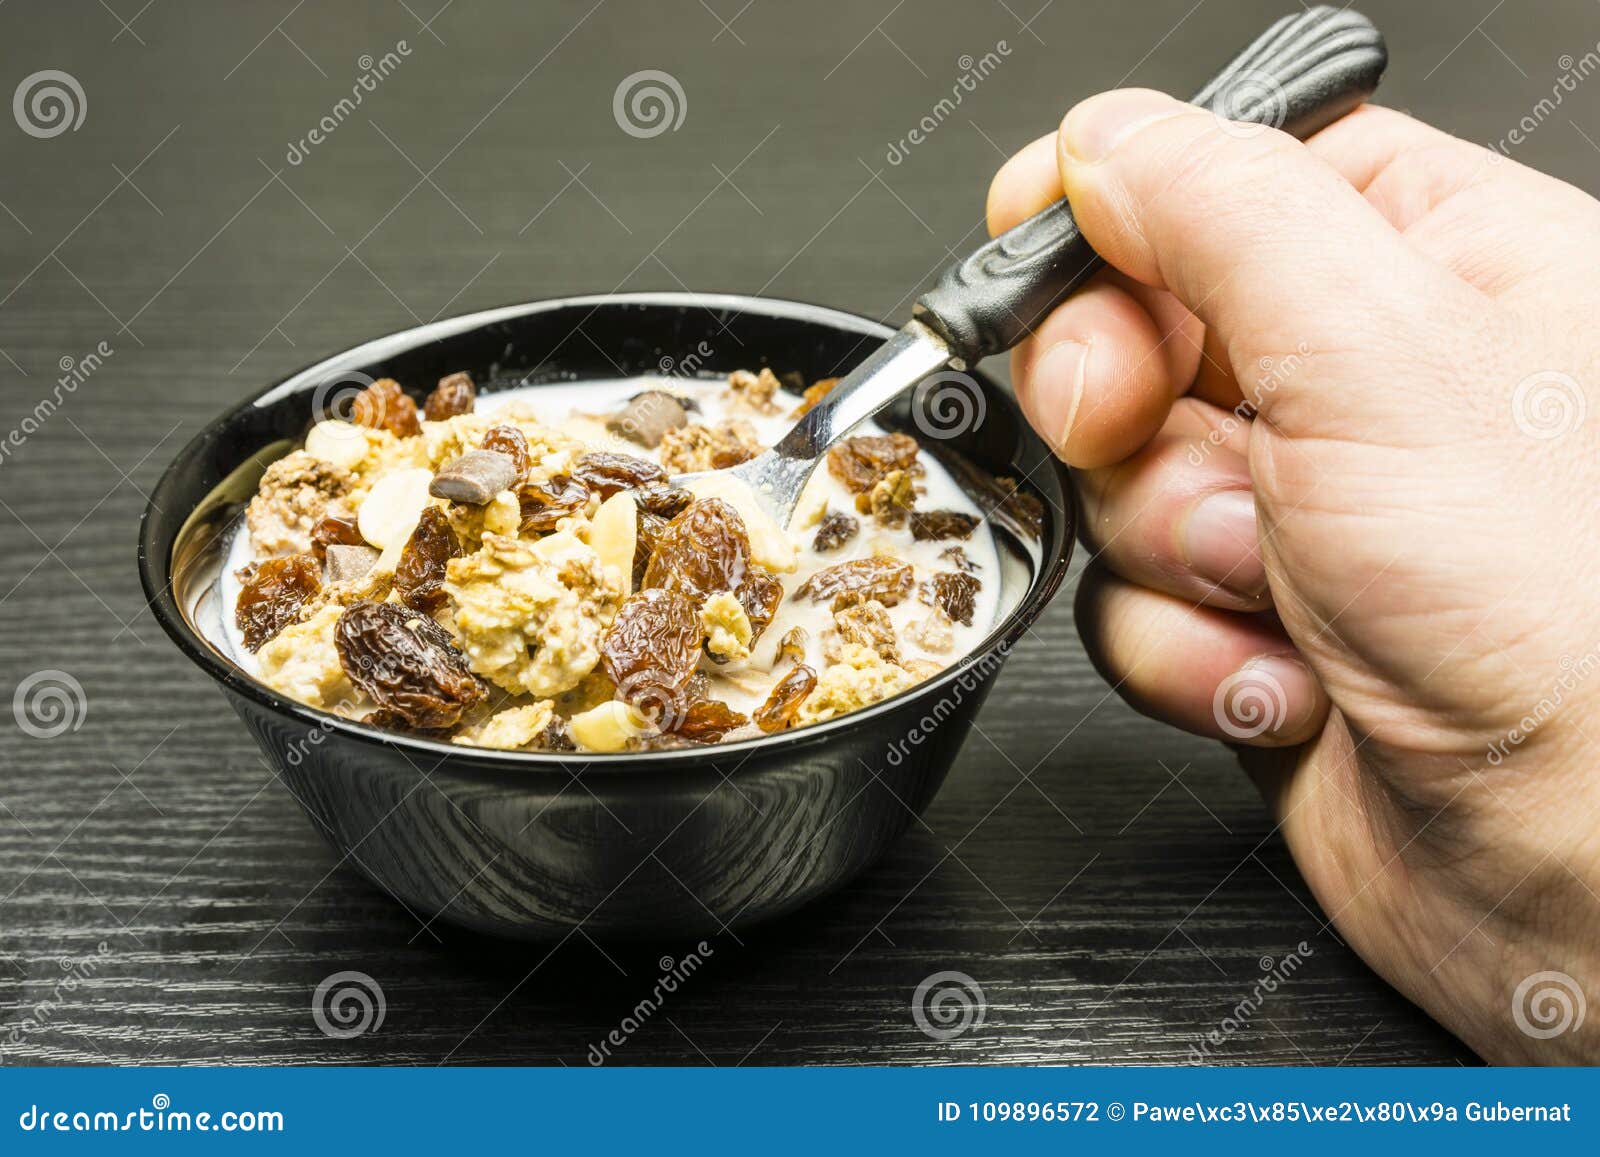 Quick Healthy Breakfast. Bowl with Roasted Crunchy Cocoa Muesli with  Peanuts, Milk Chocolate, Caramel and Raisins with Milk. Stock Photo - Image  of delicacy, hold: 109896572